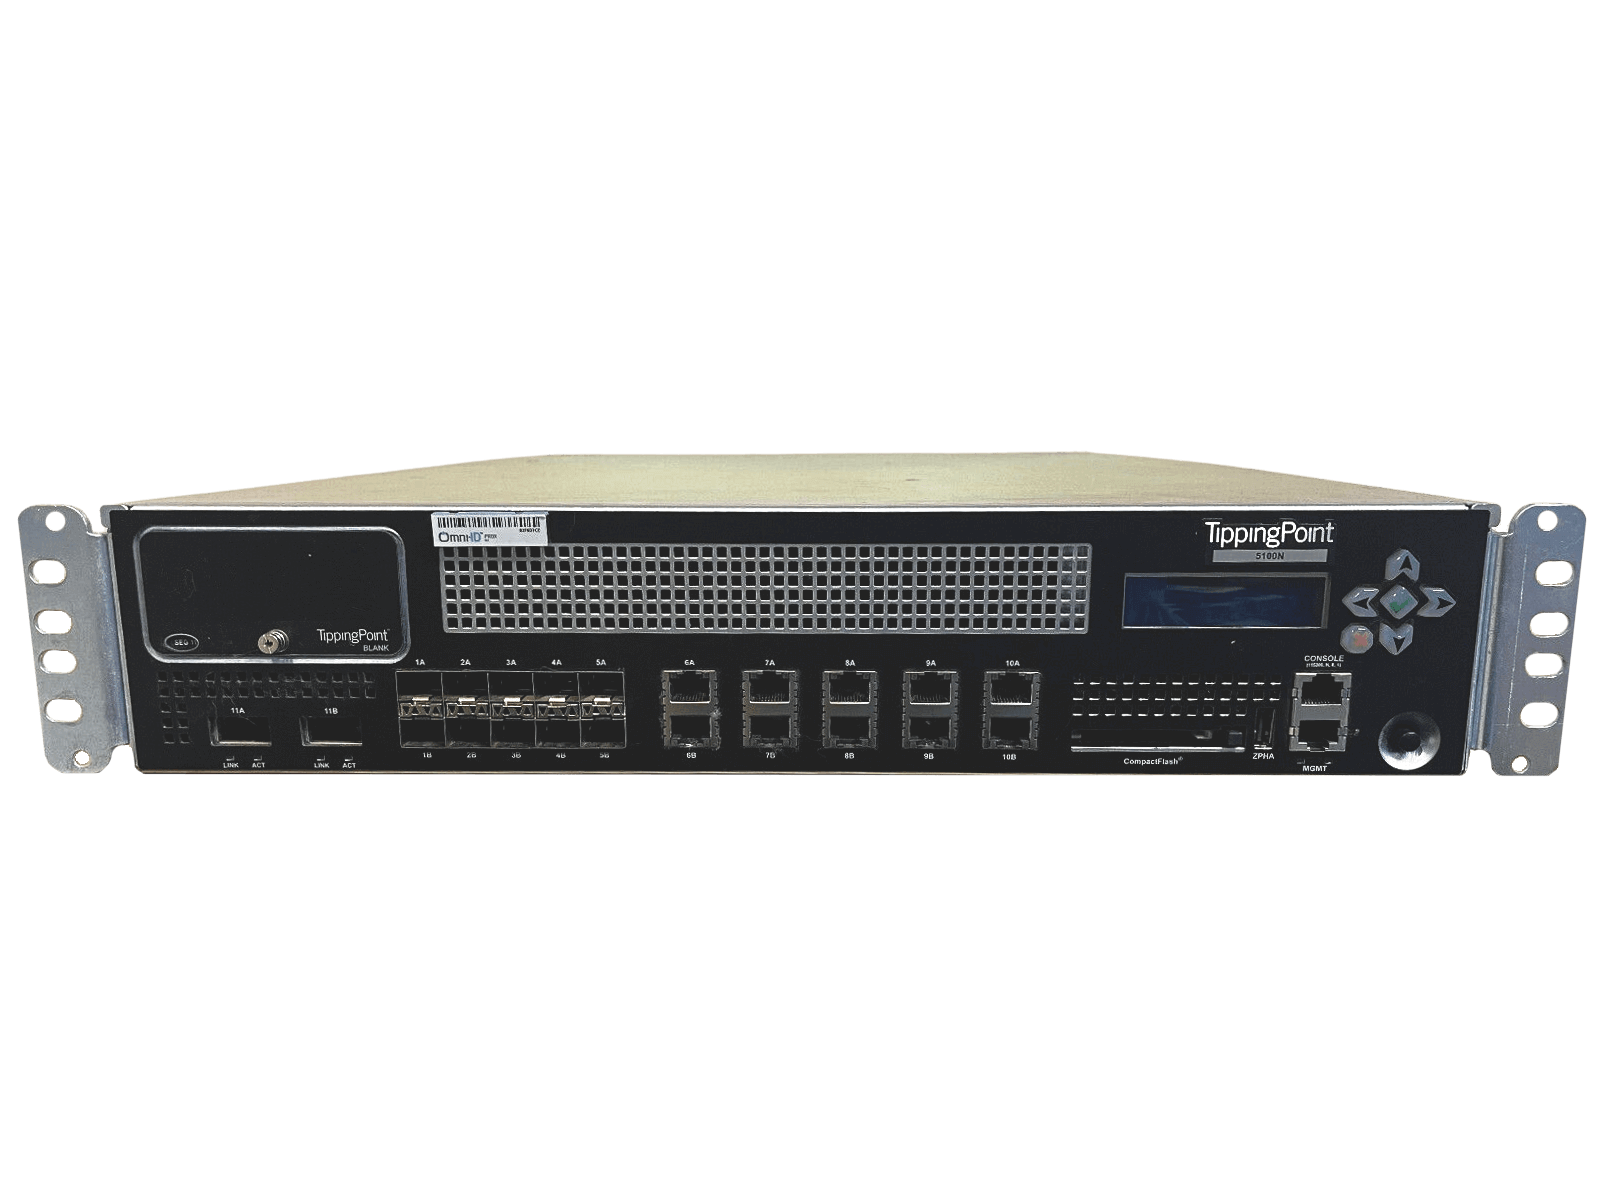 HP JC021A TippingPoint S5100N IPS Intrustion Prevention System 10x RJ45 10x SFP 2x XFP.